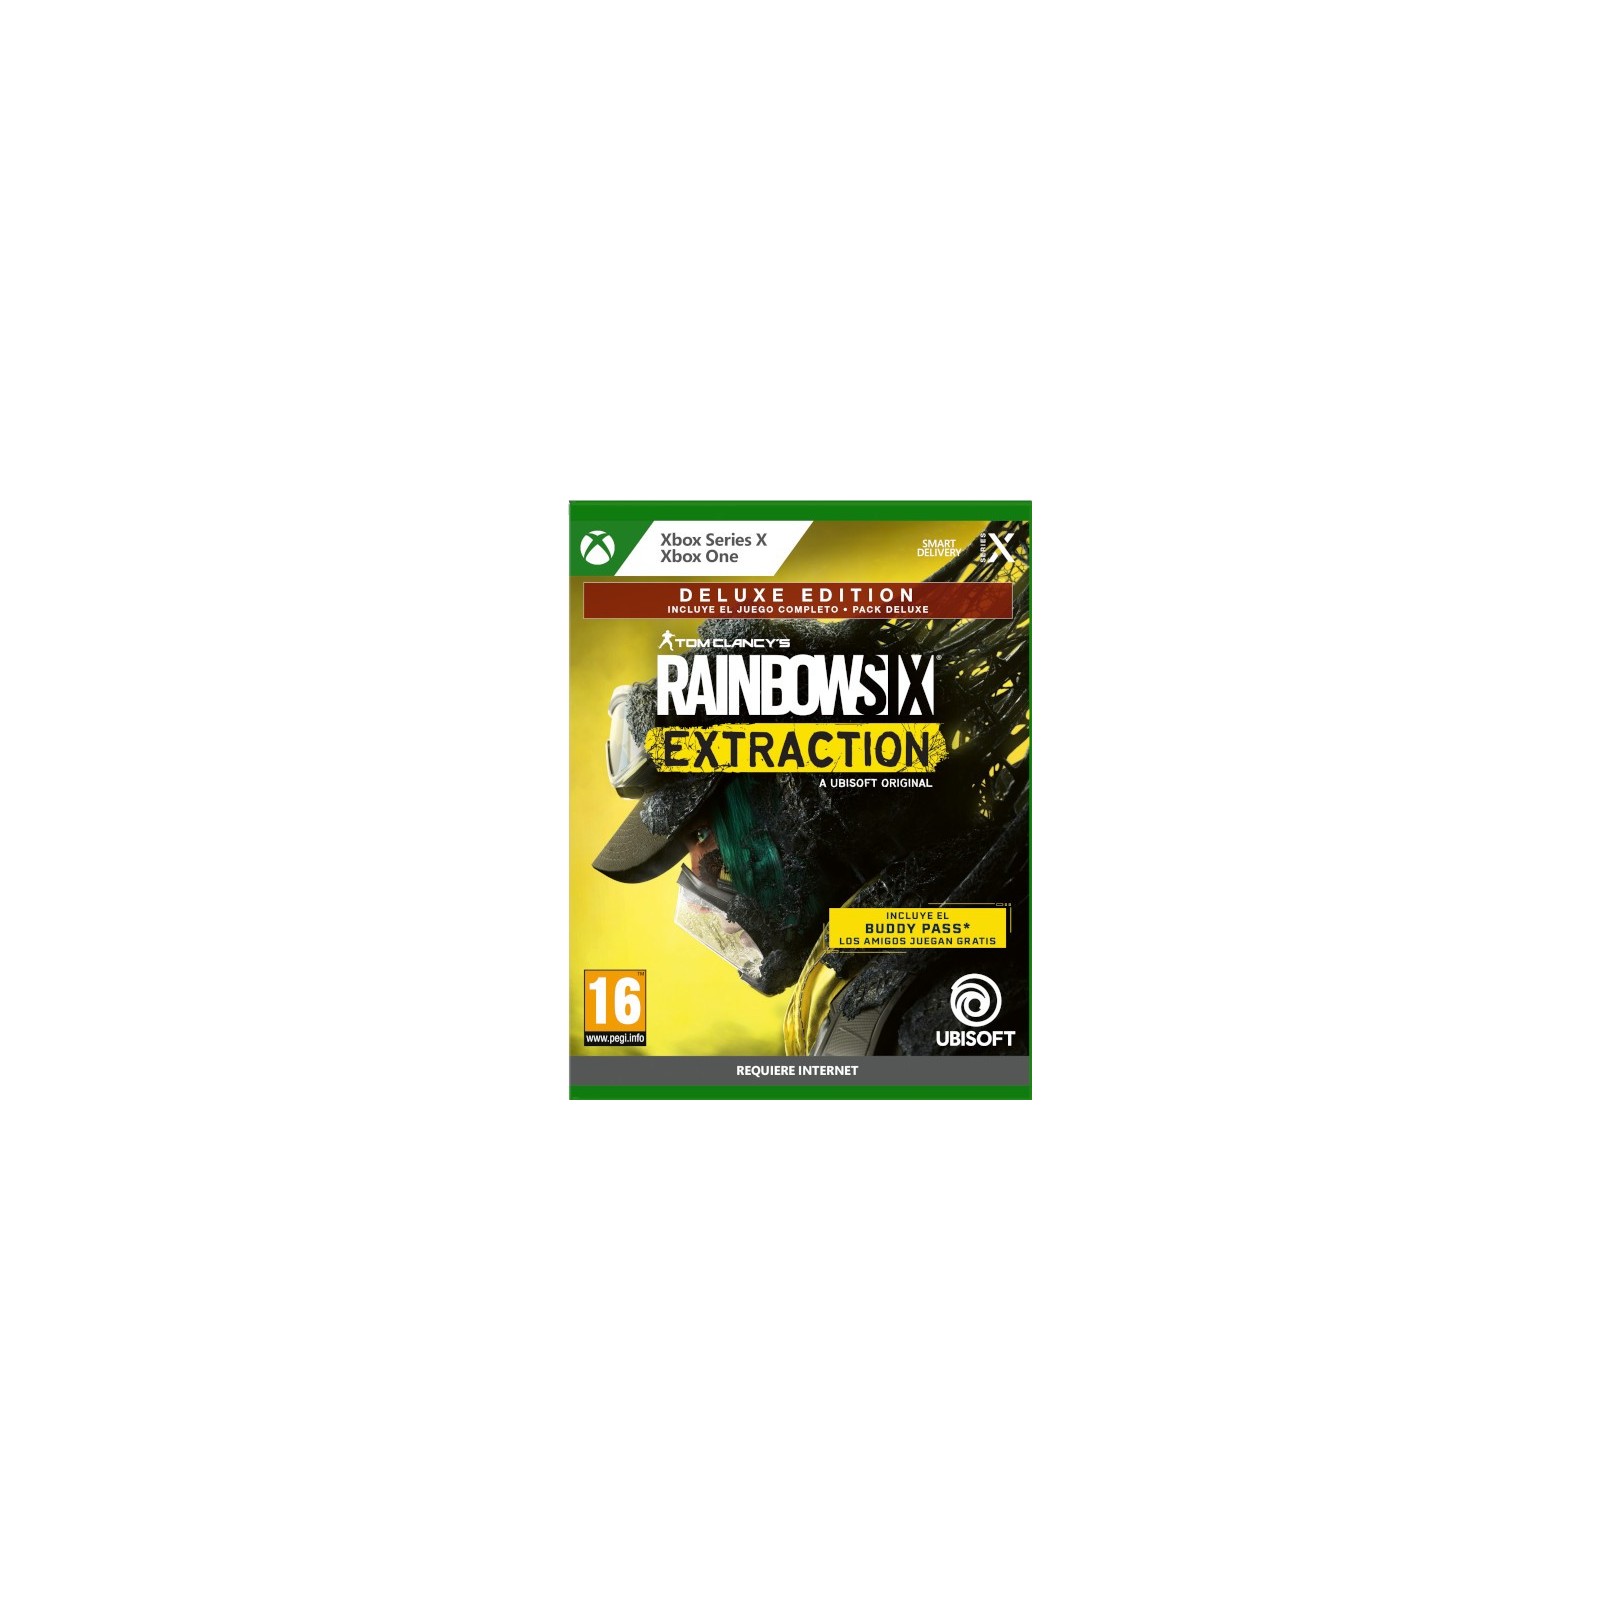 RAINBOW SIX EXTRACTION DELUXE EDITION (JUEGO COMPLETO + PACK DELUXE + BUDDY PASS) (XBONE)